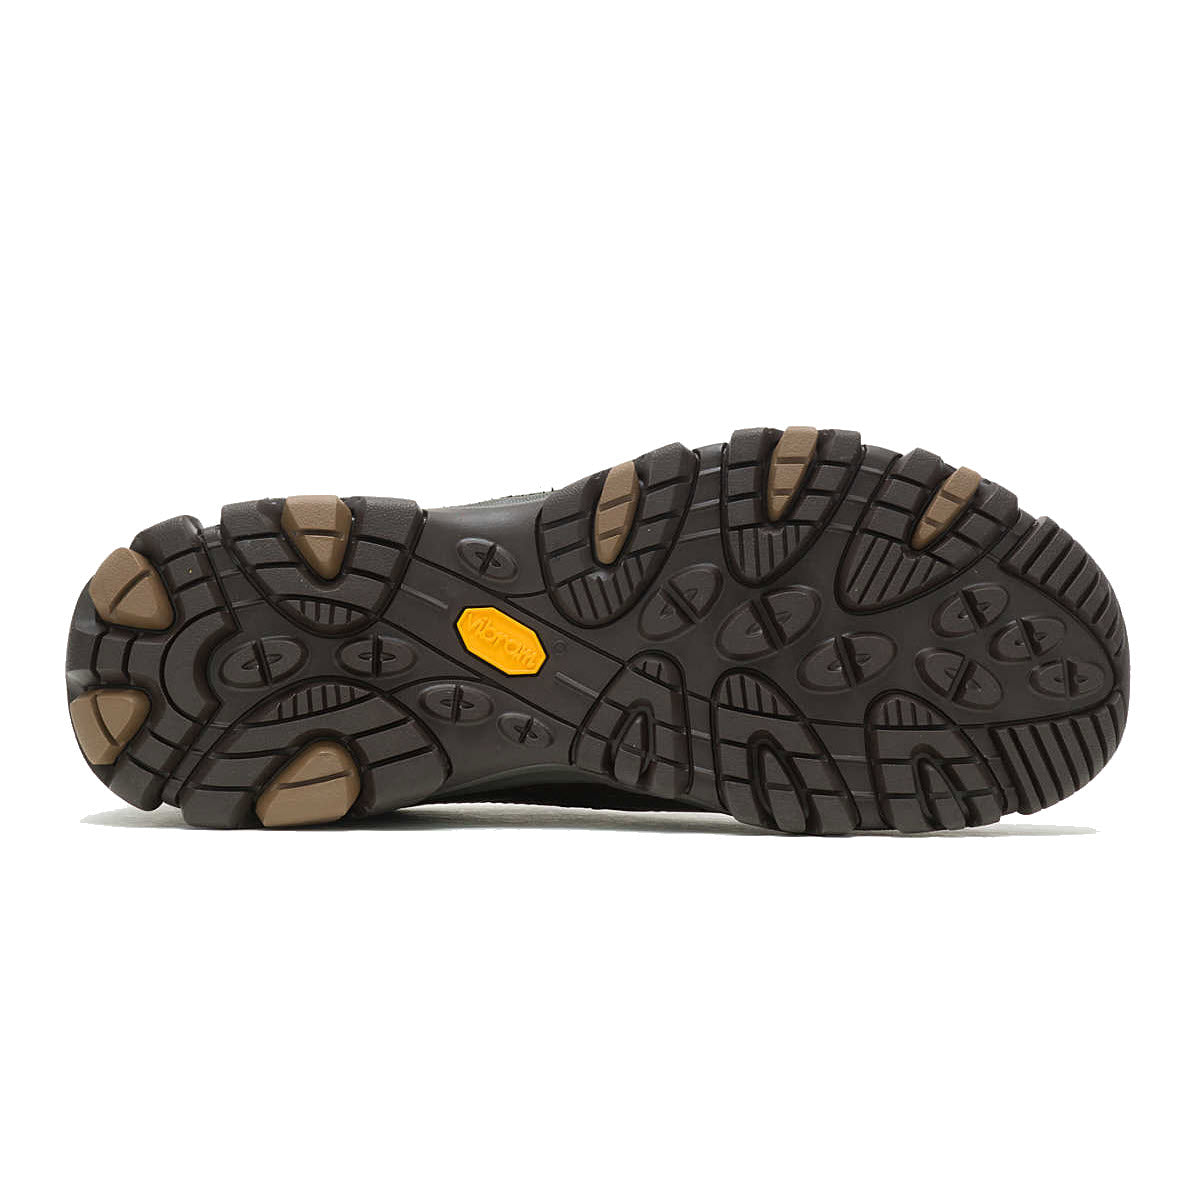 Bottom view of a Merrell MOAB ADVENTURE 3 MOC LEATHER EARTH - MENS shoe displaying a detailed black and tan Vibram® TC5+ outsole tread pattern with a visible brand logo.